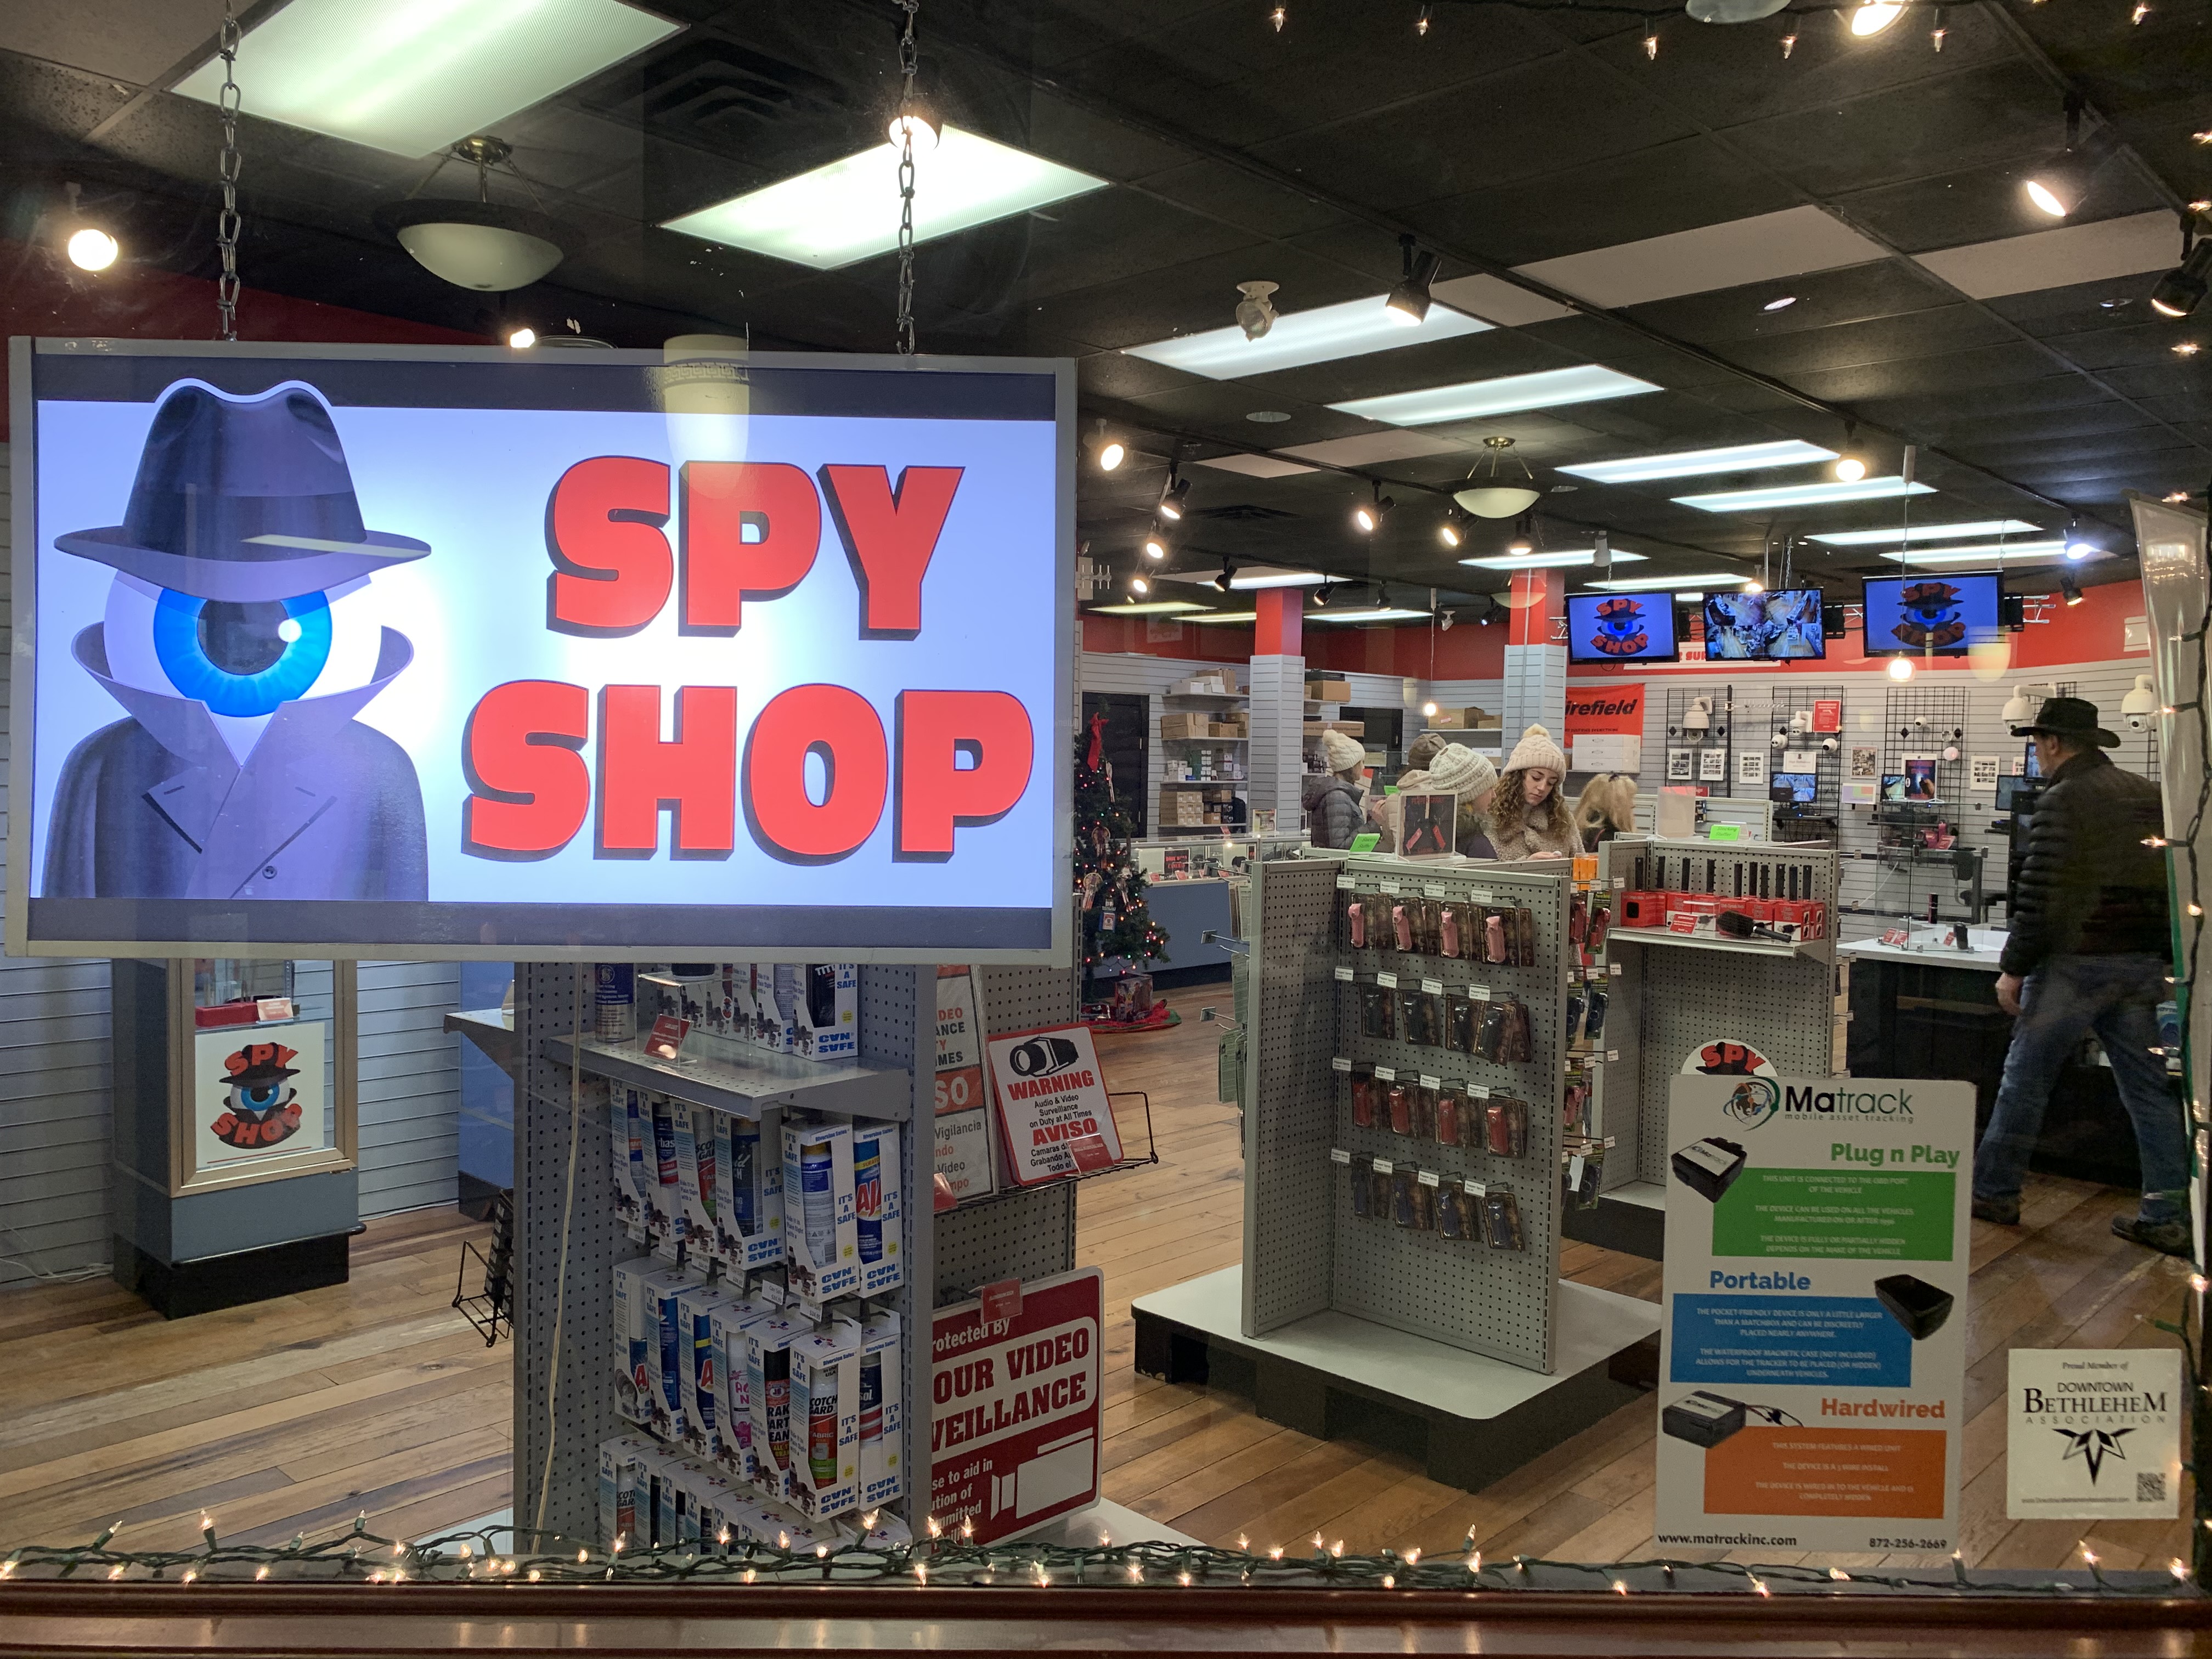 Welcome to the Bethlehem Spy Shop. We 